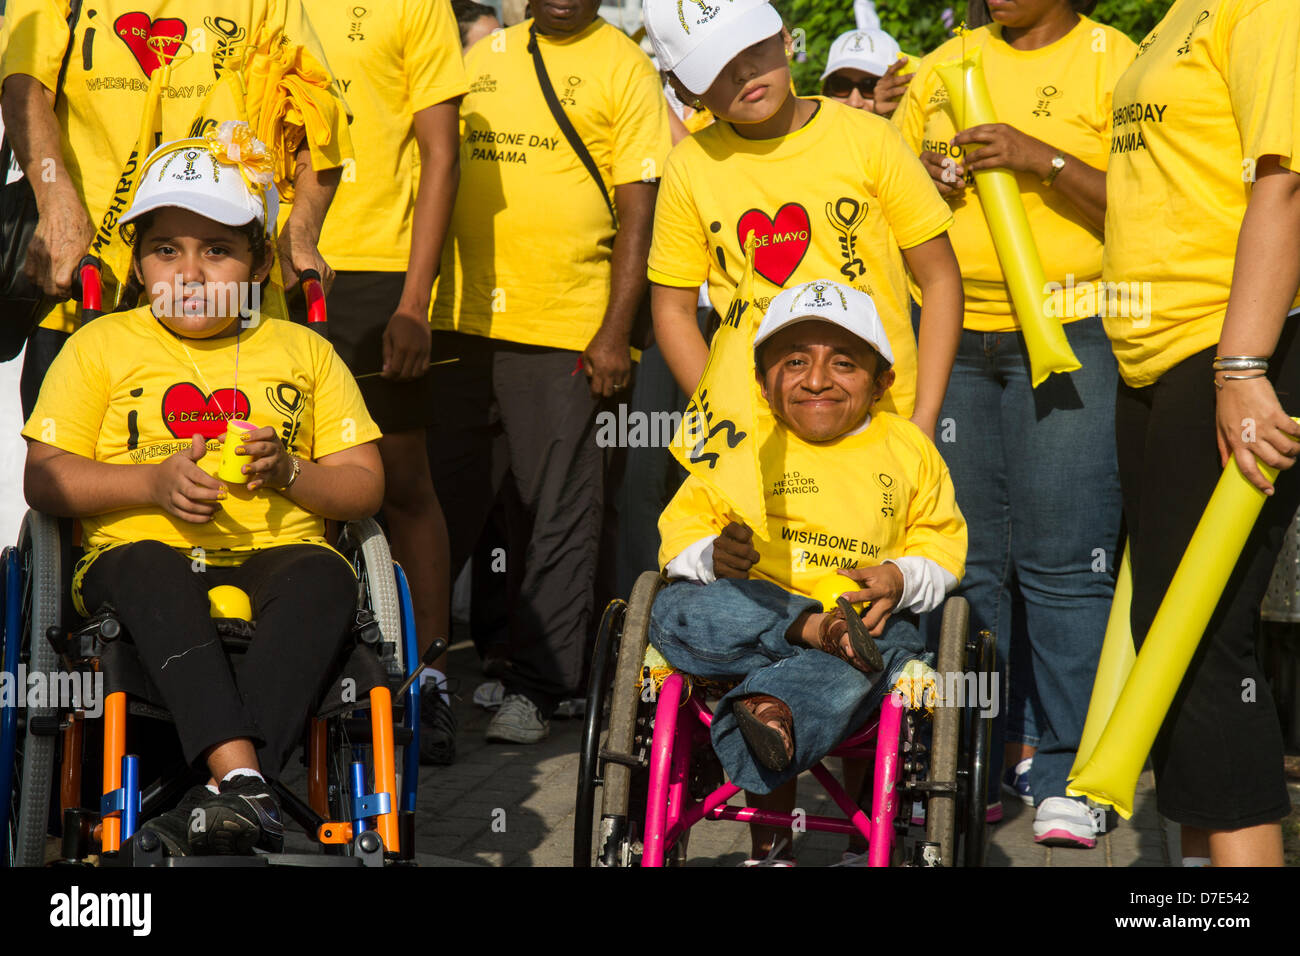 Panama City, Republic of Panama. 5th May 2013. A parade on Panama City, Republic of Panama to help getting awareness about brittle bone disease, a congenital bone disorder. The condition, or types of it, has had various other names over the years and in different nations. Among some of the most common alternatives are Ekman-Lobstein syndrome, Vrolik syndrome, and the colloquial glass-bone disease. The name osteogenesis imperfecta dates to at least 1895[18] and has been the usual medical term in the 20th century to present. Credit:  Humberto Olarte Cupas / Alamy Live News Stock Photo